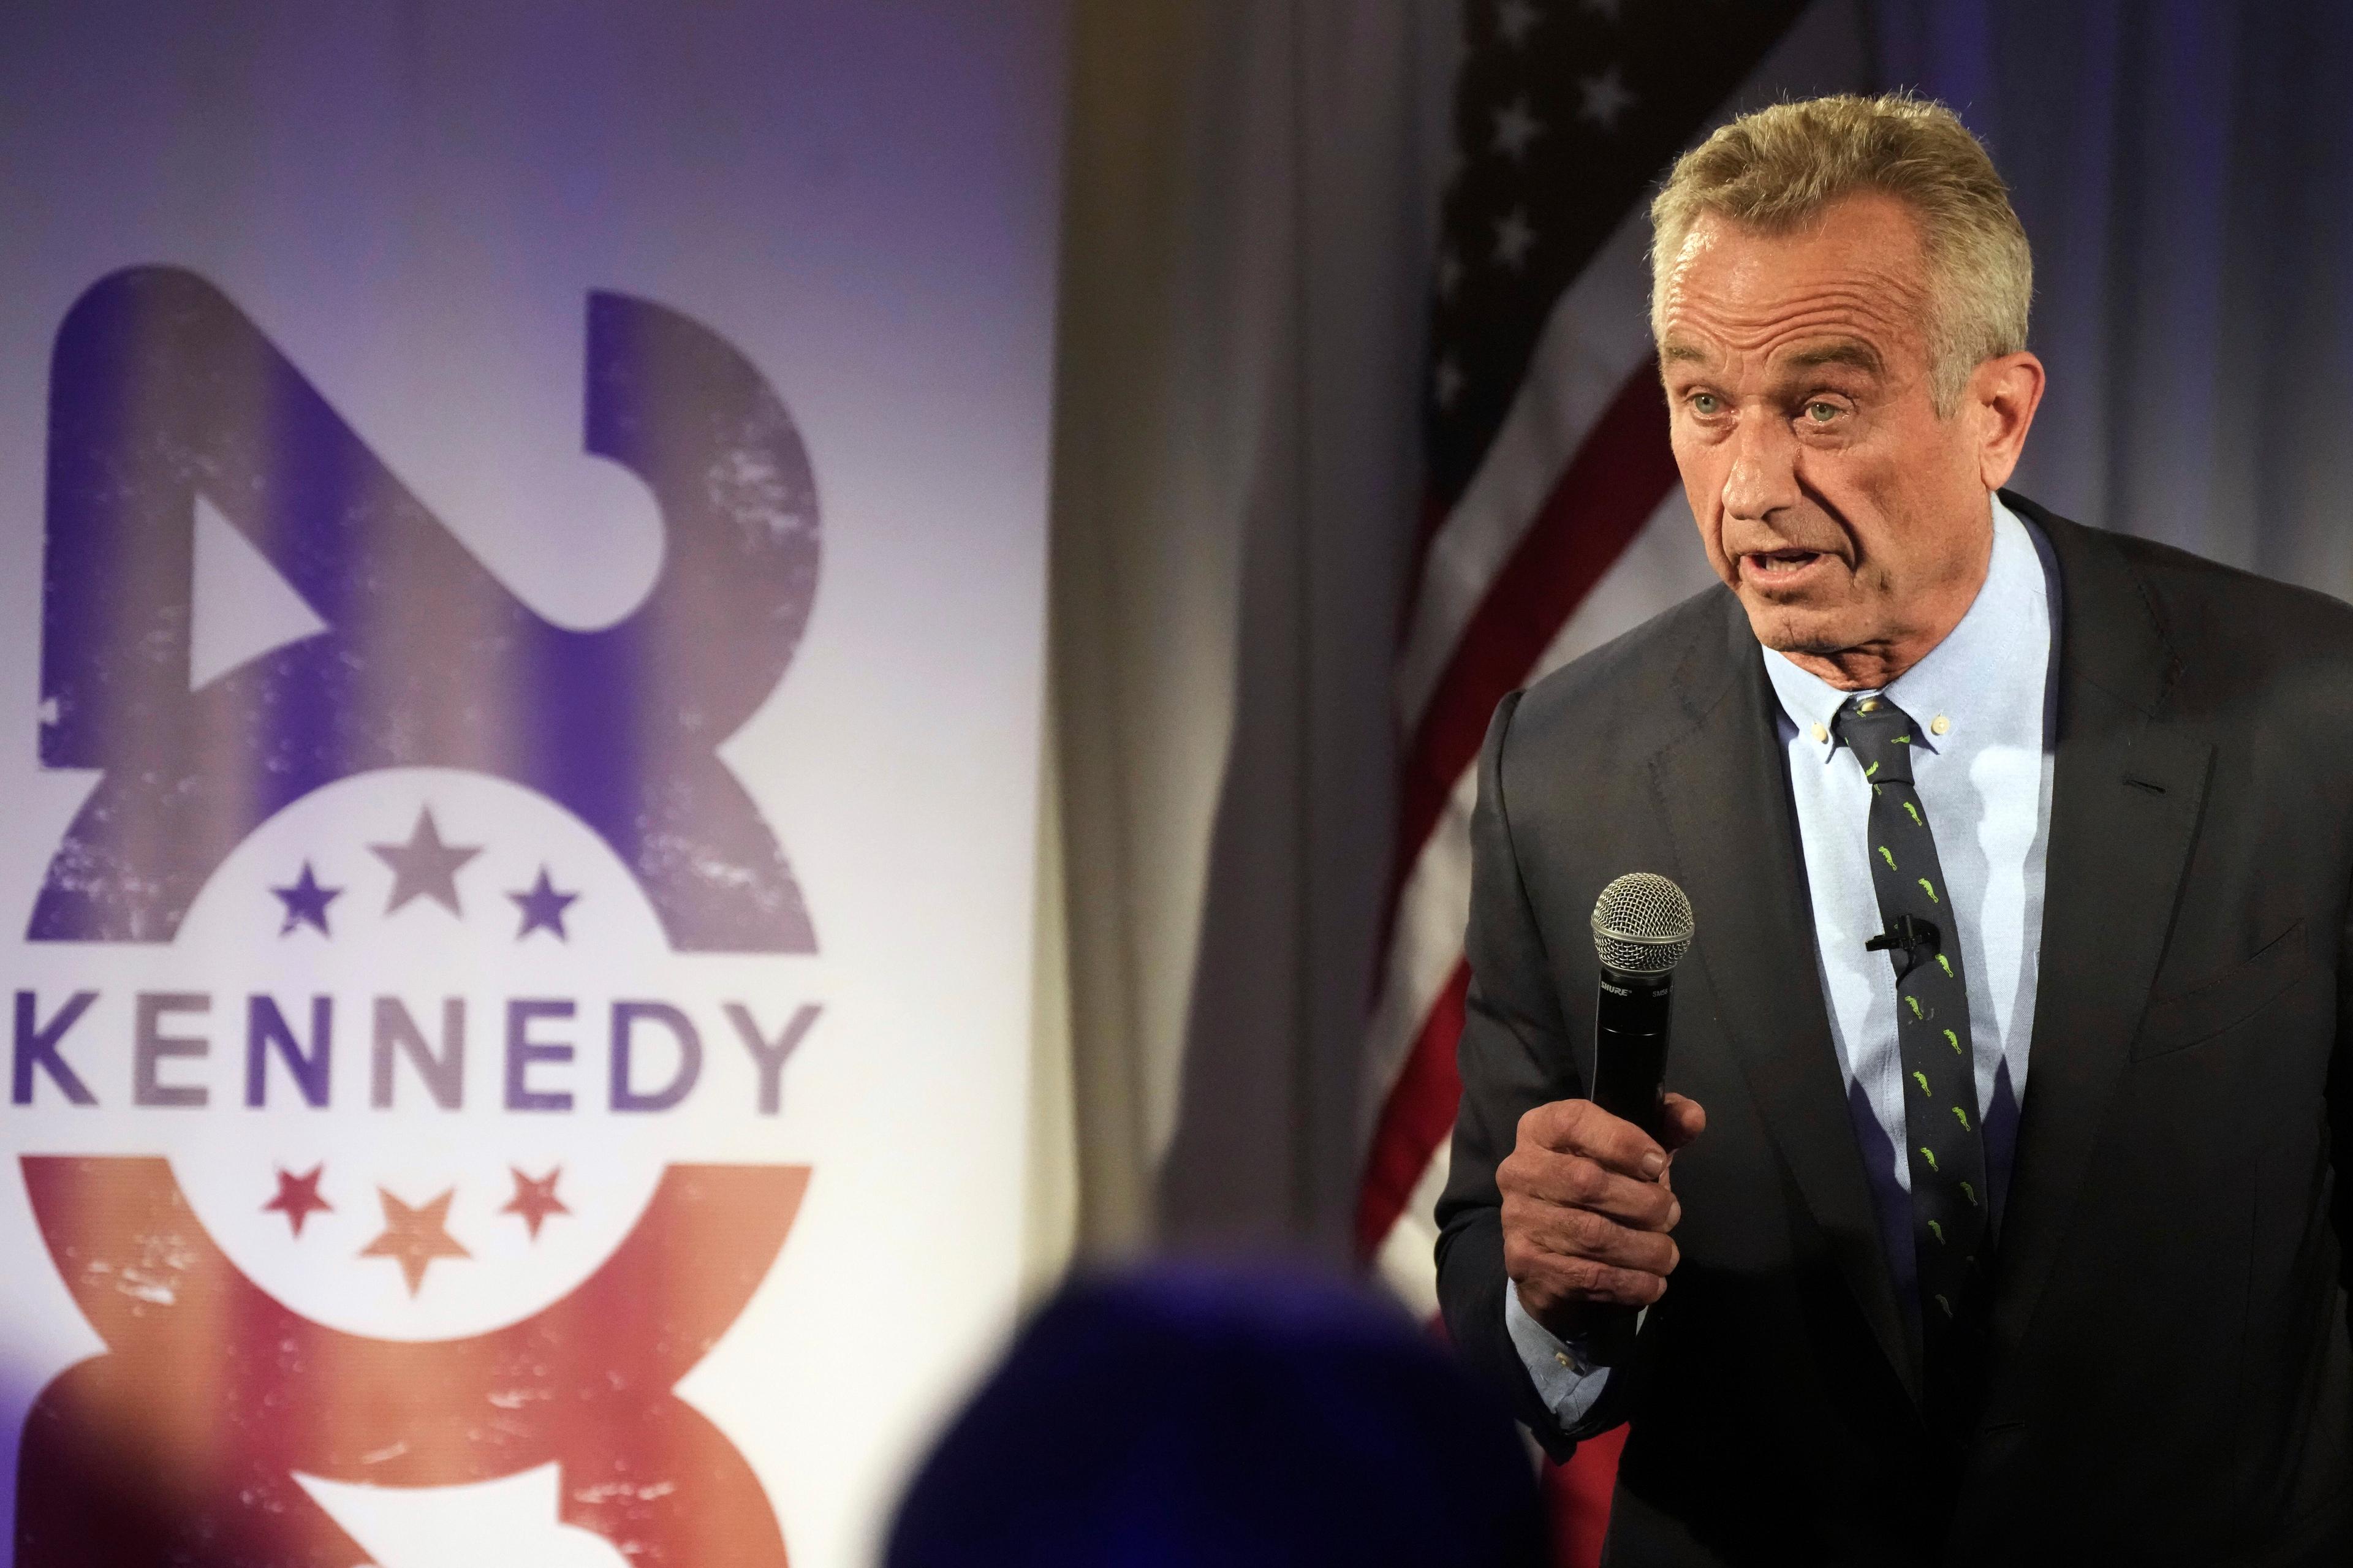 Robert Kennedy Jr. stands with a microphone in his hand near a sign in the background that promotes his campaign.